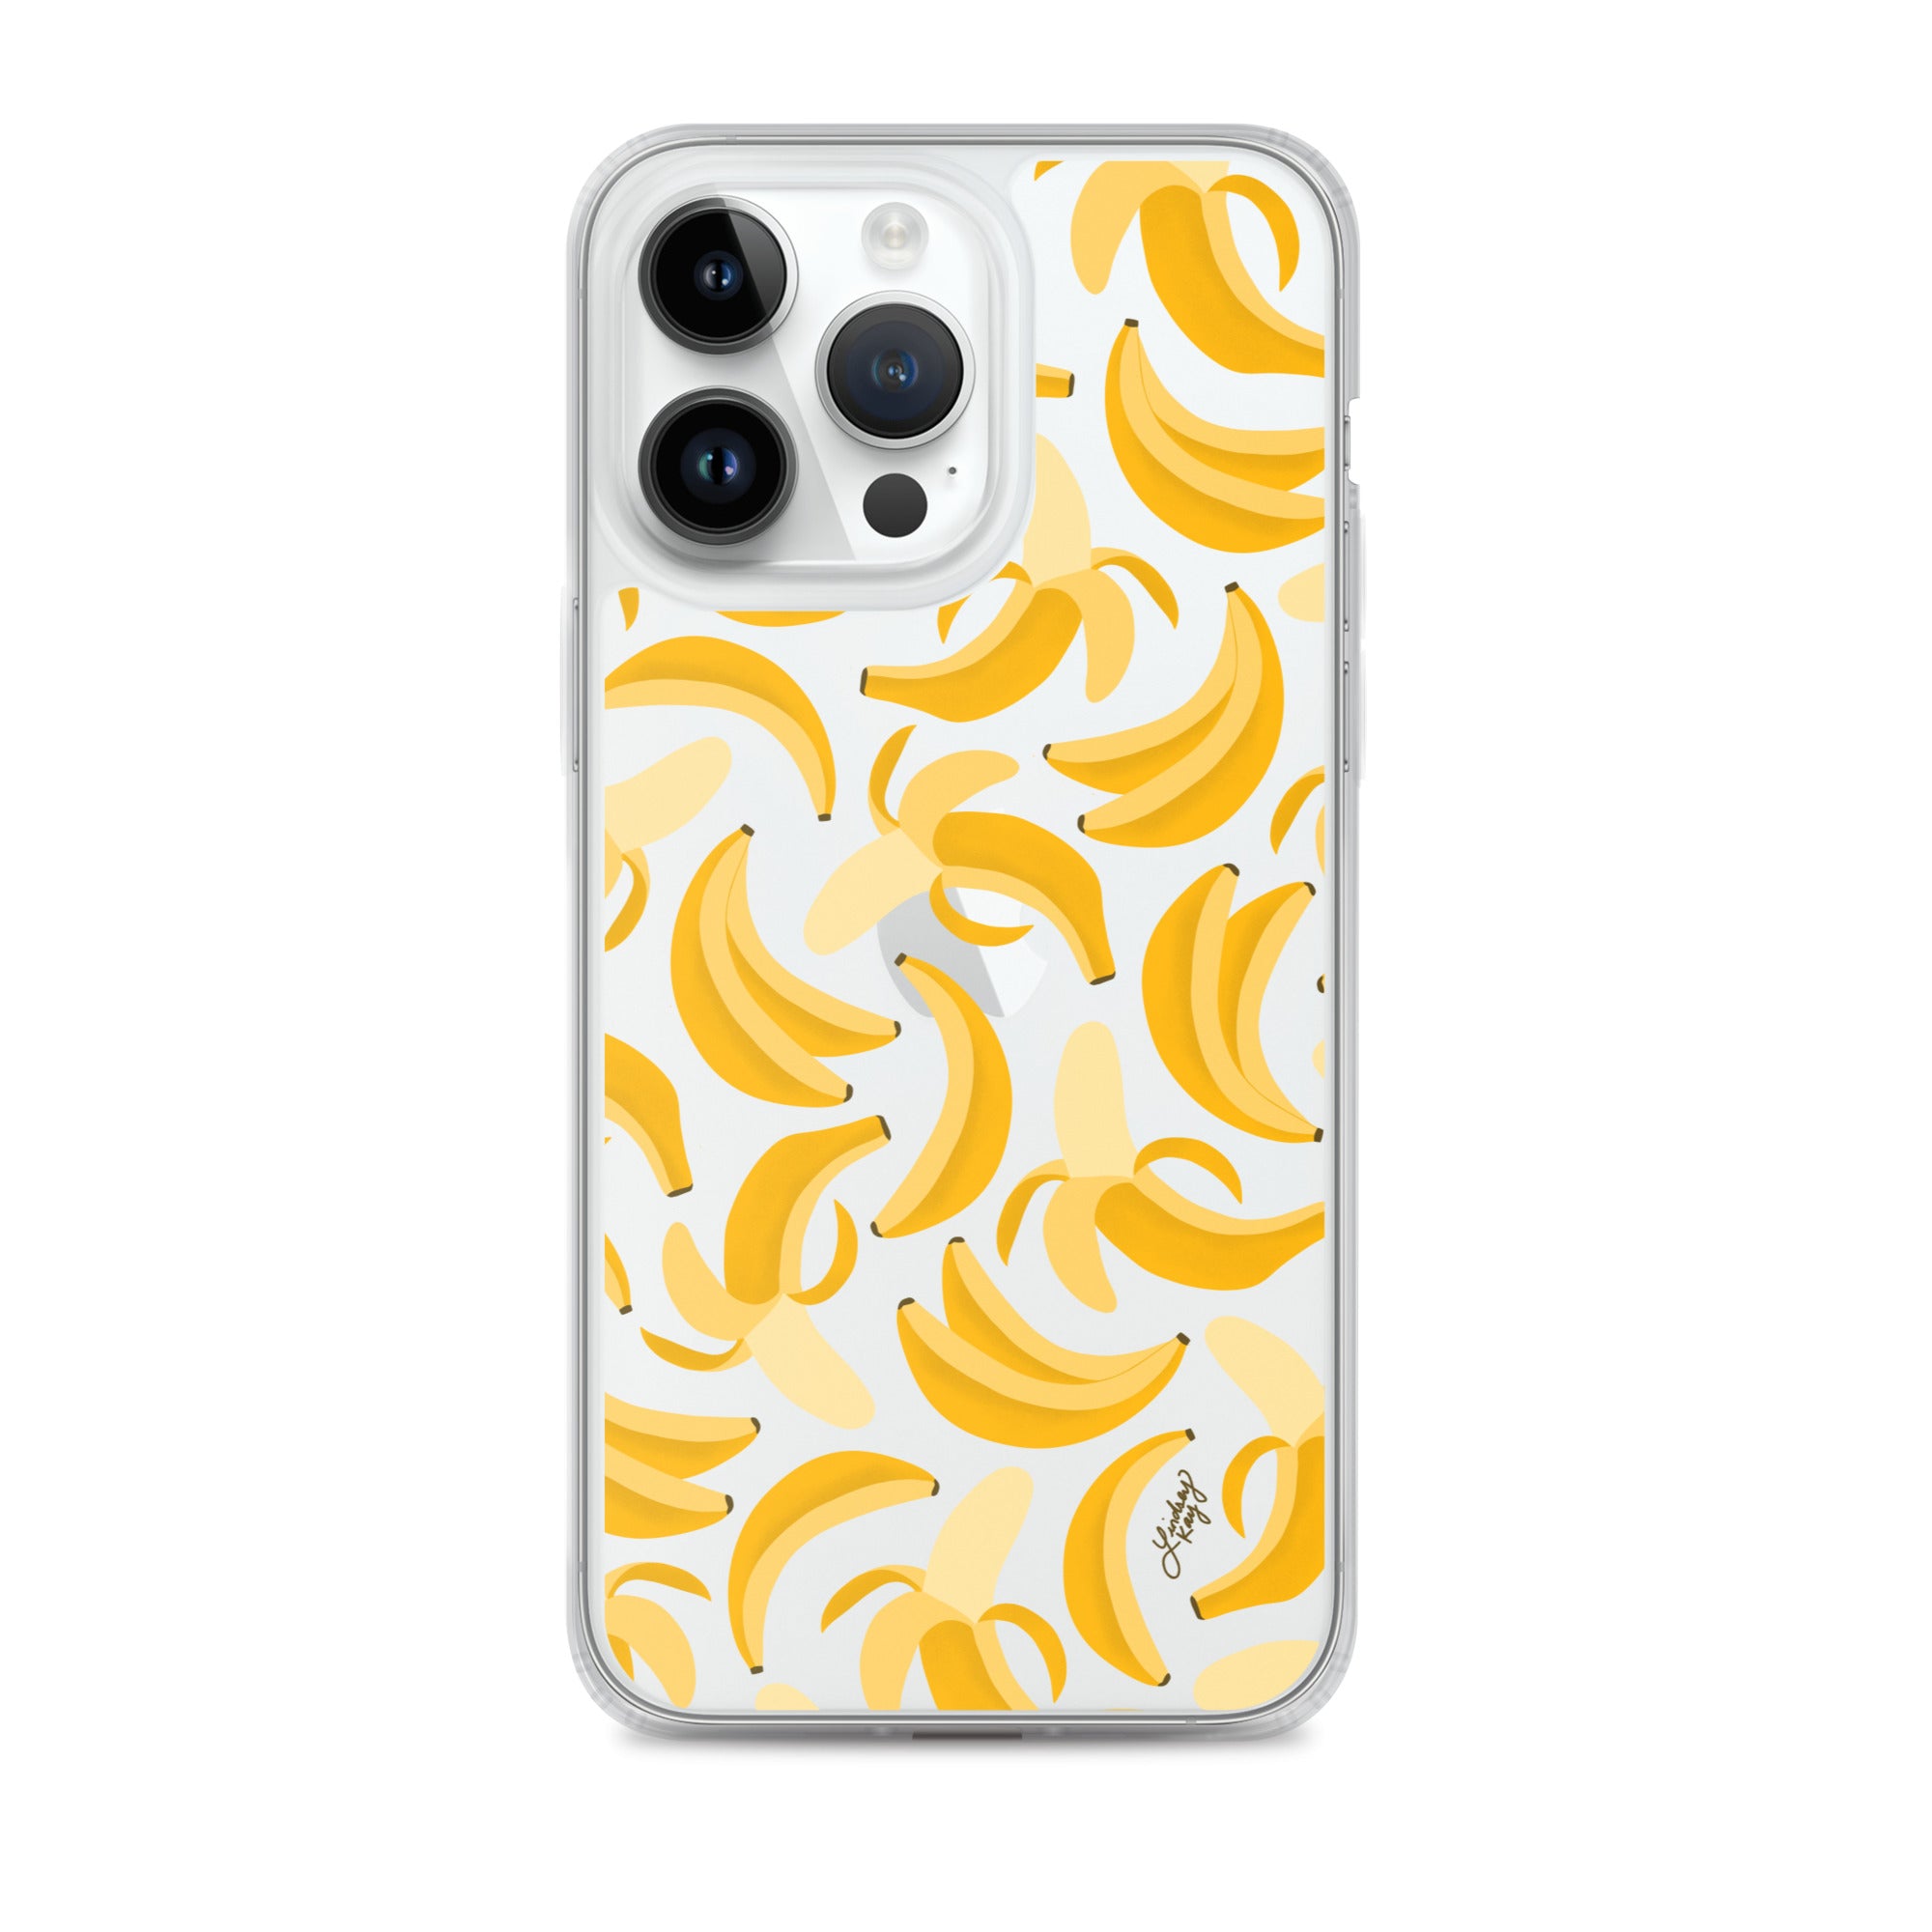 banana patterned iphone case clear protective phone mobile accessories lindsey kay collective 